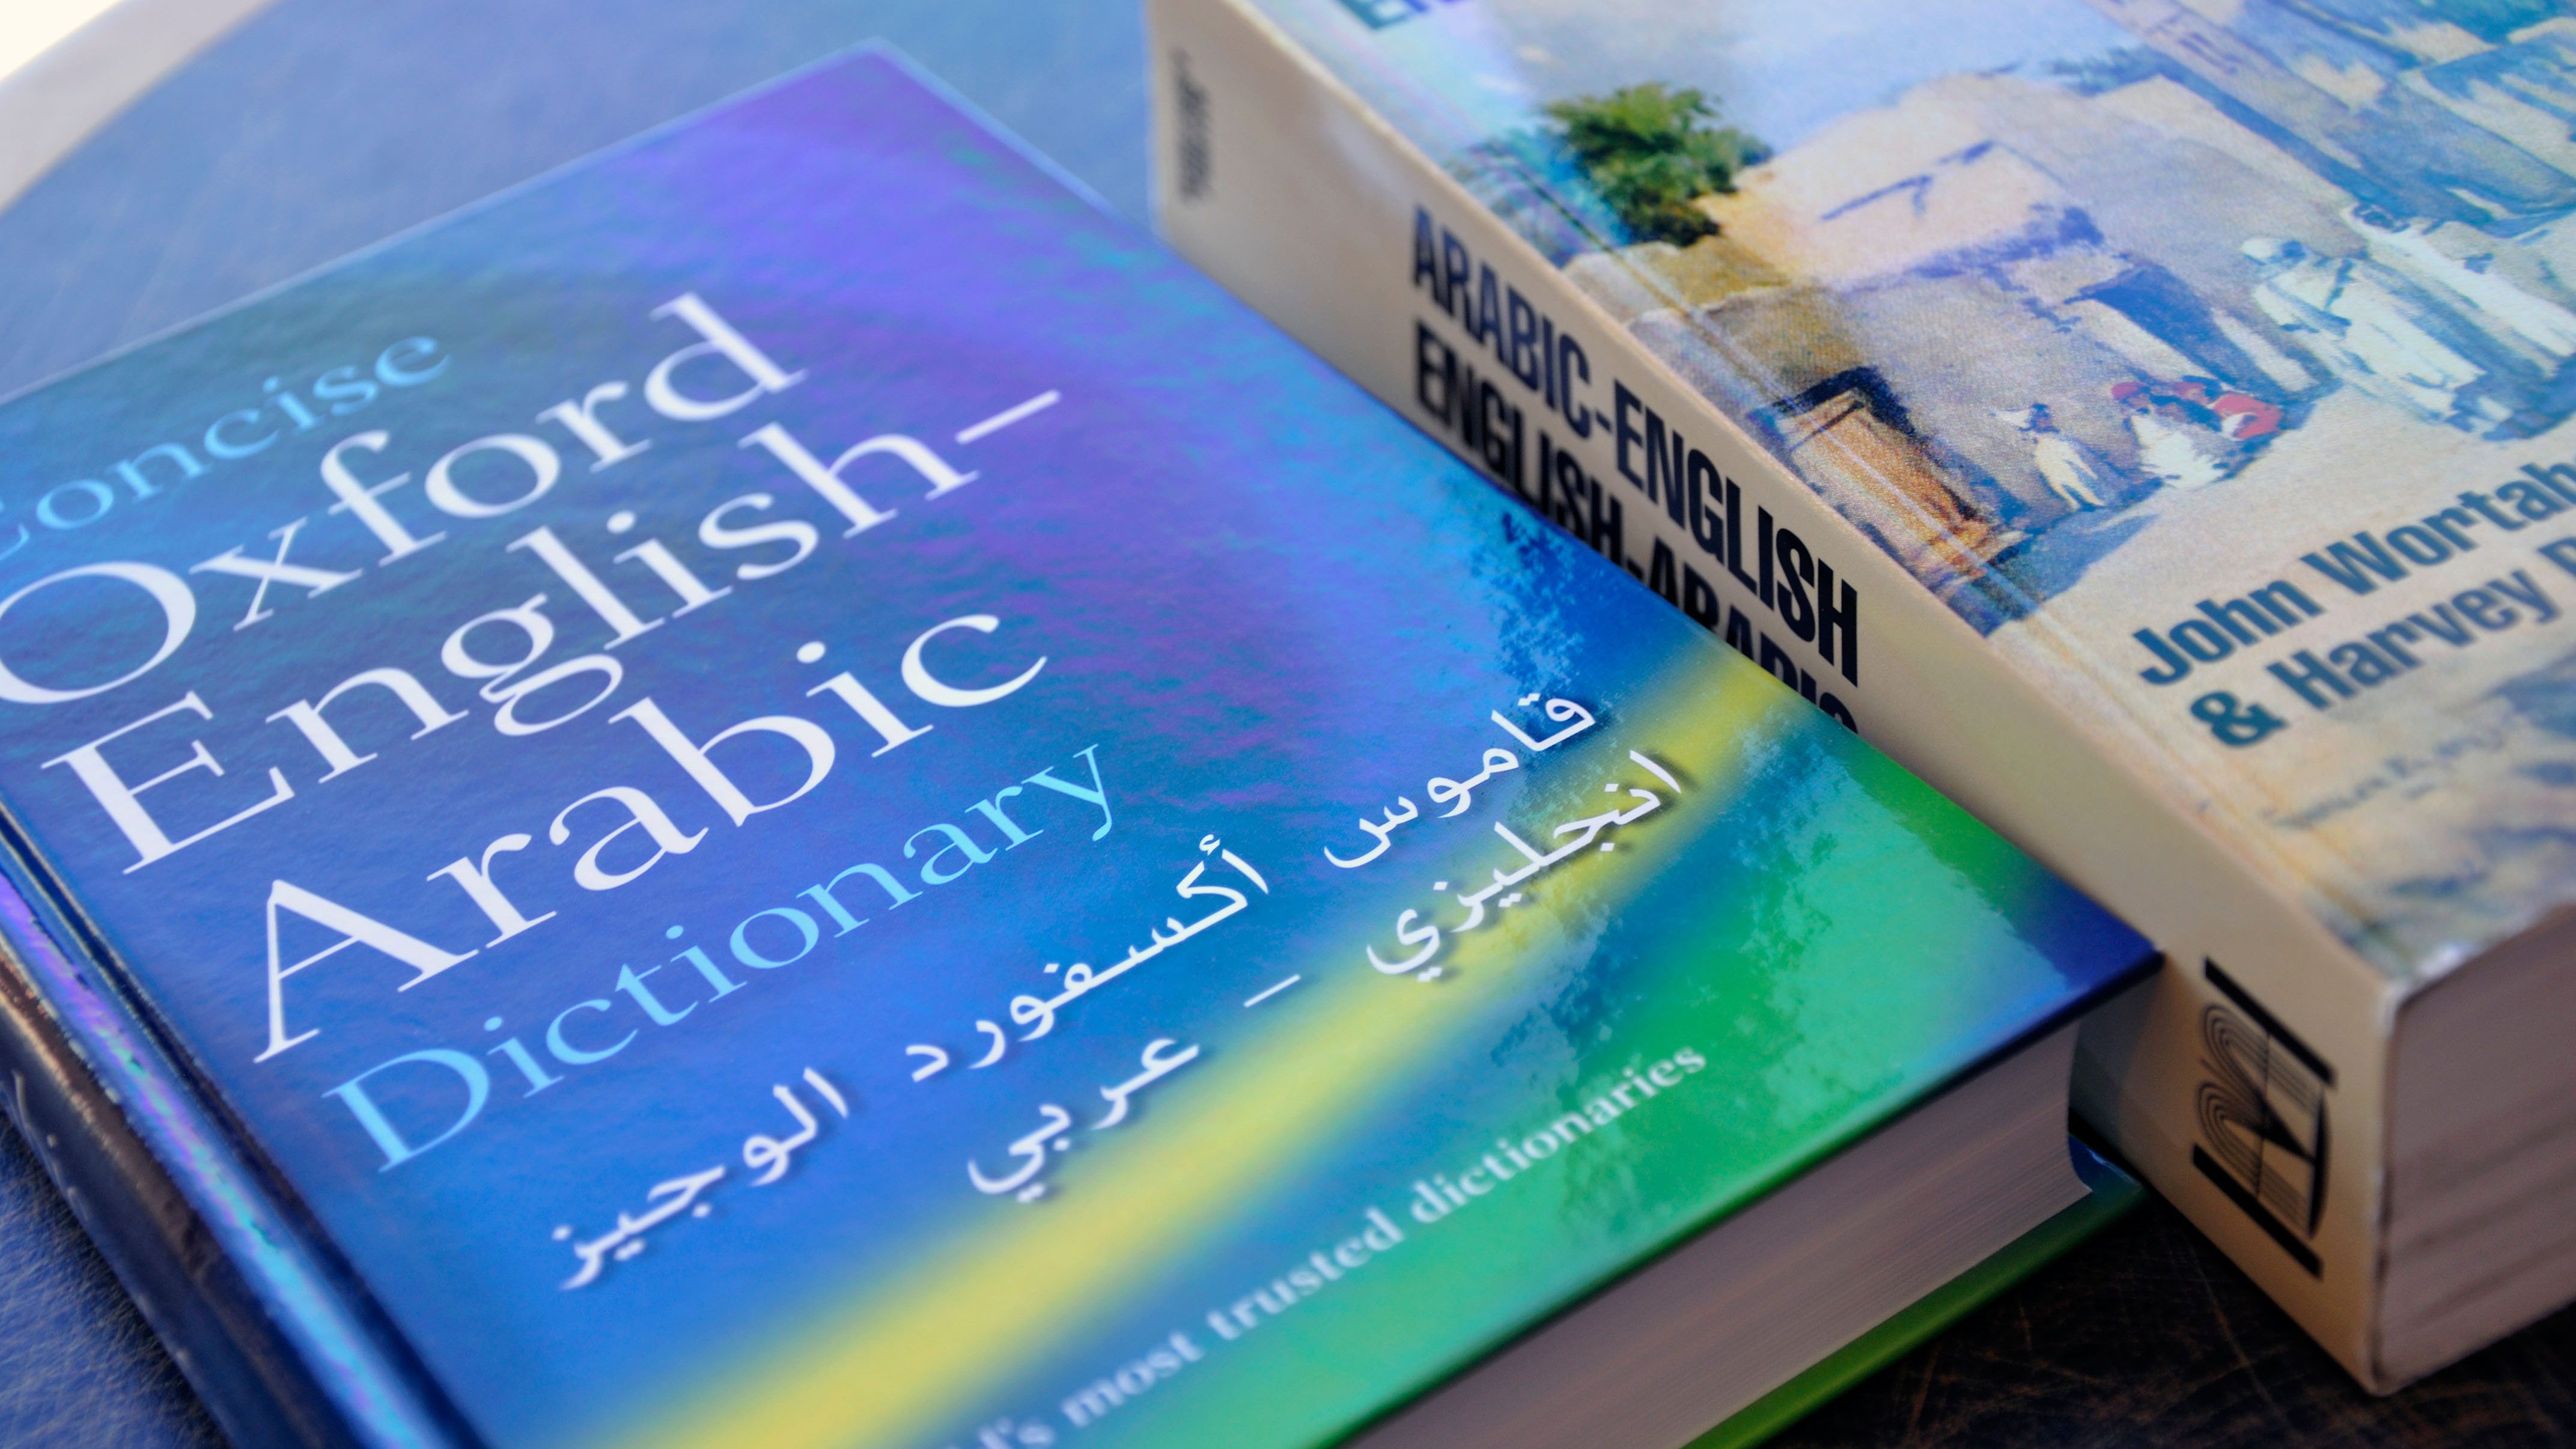 13 Hilarious Arabic Swear Words and Phrases